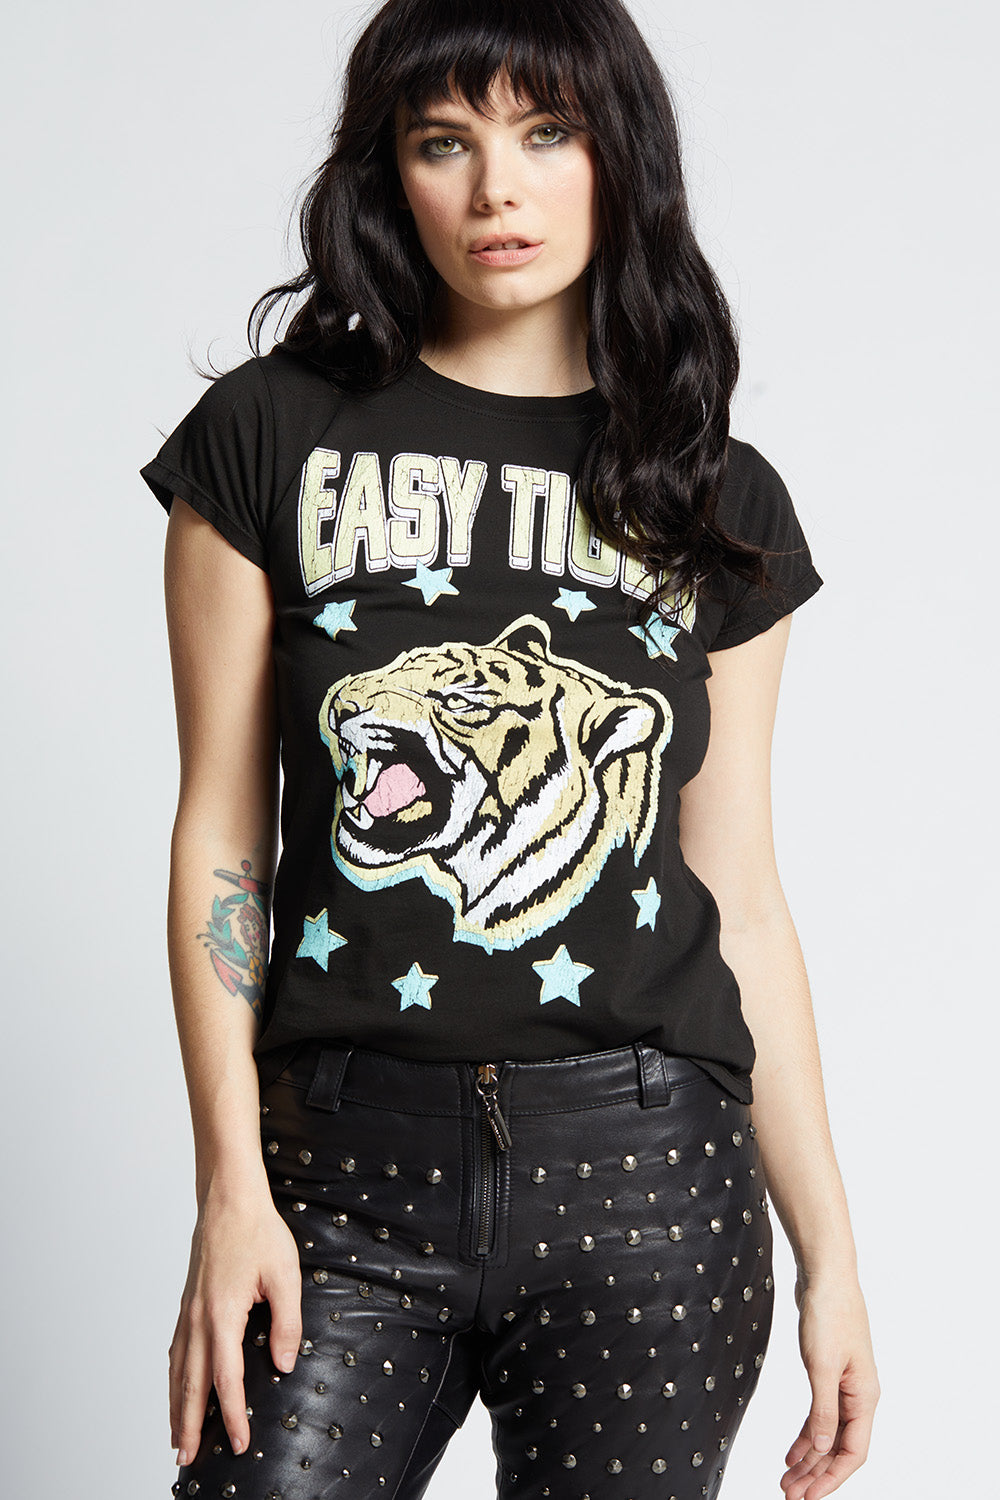 Easy Tiger Baby Tee